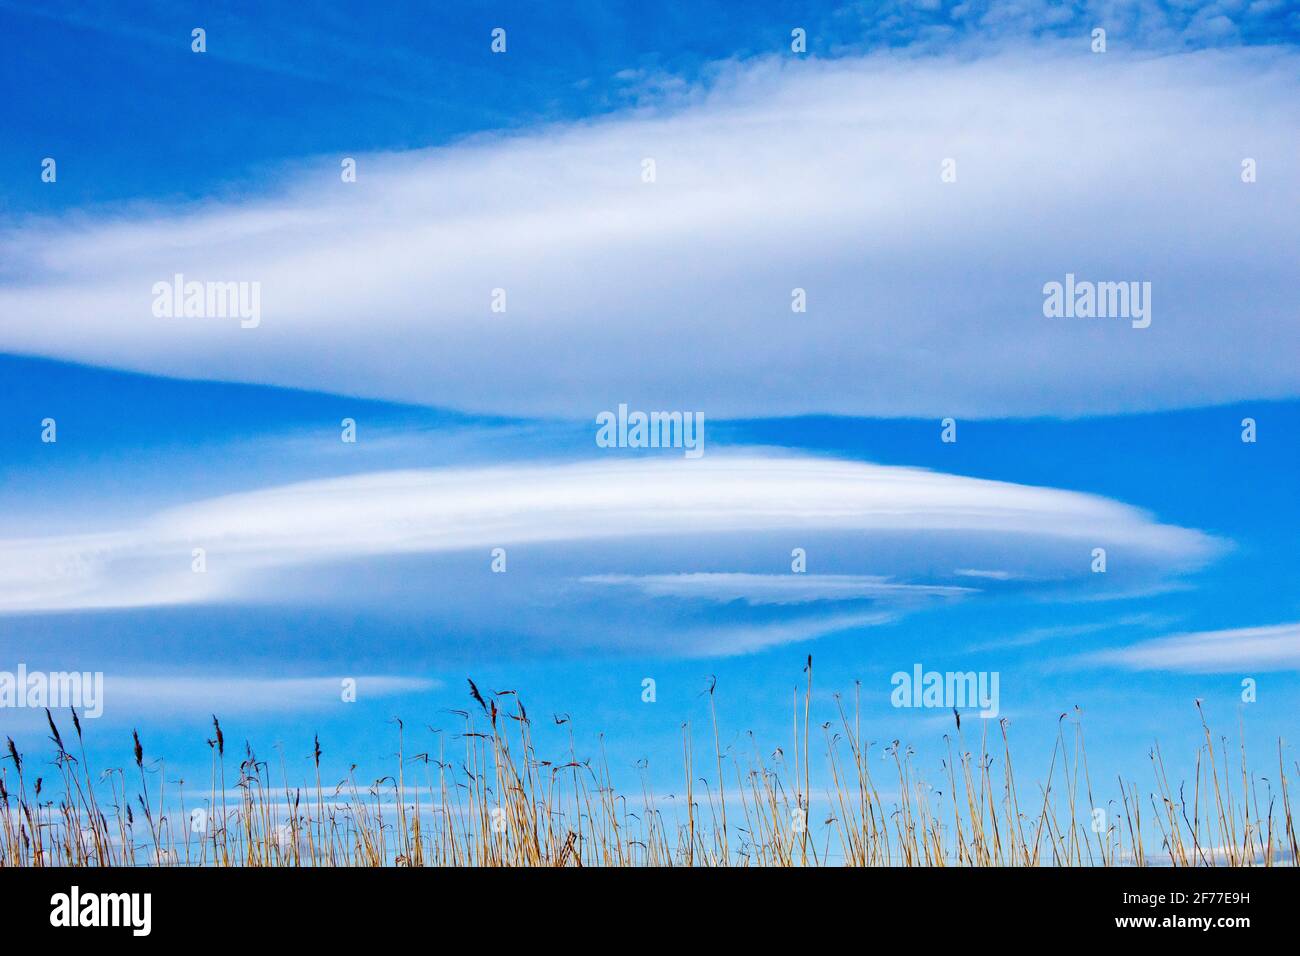 Large white lenticular clouds (altocumulus lenticularis) form in the sky on a bright but breezy spring day. Sometimes called spaceship clouds. Stock Photo